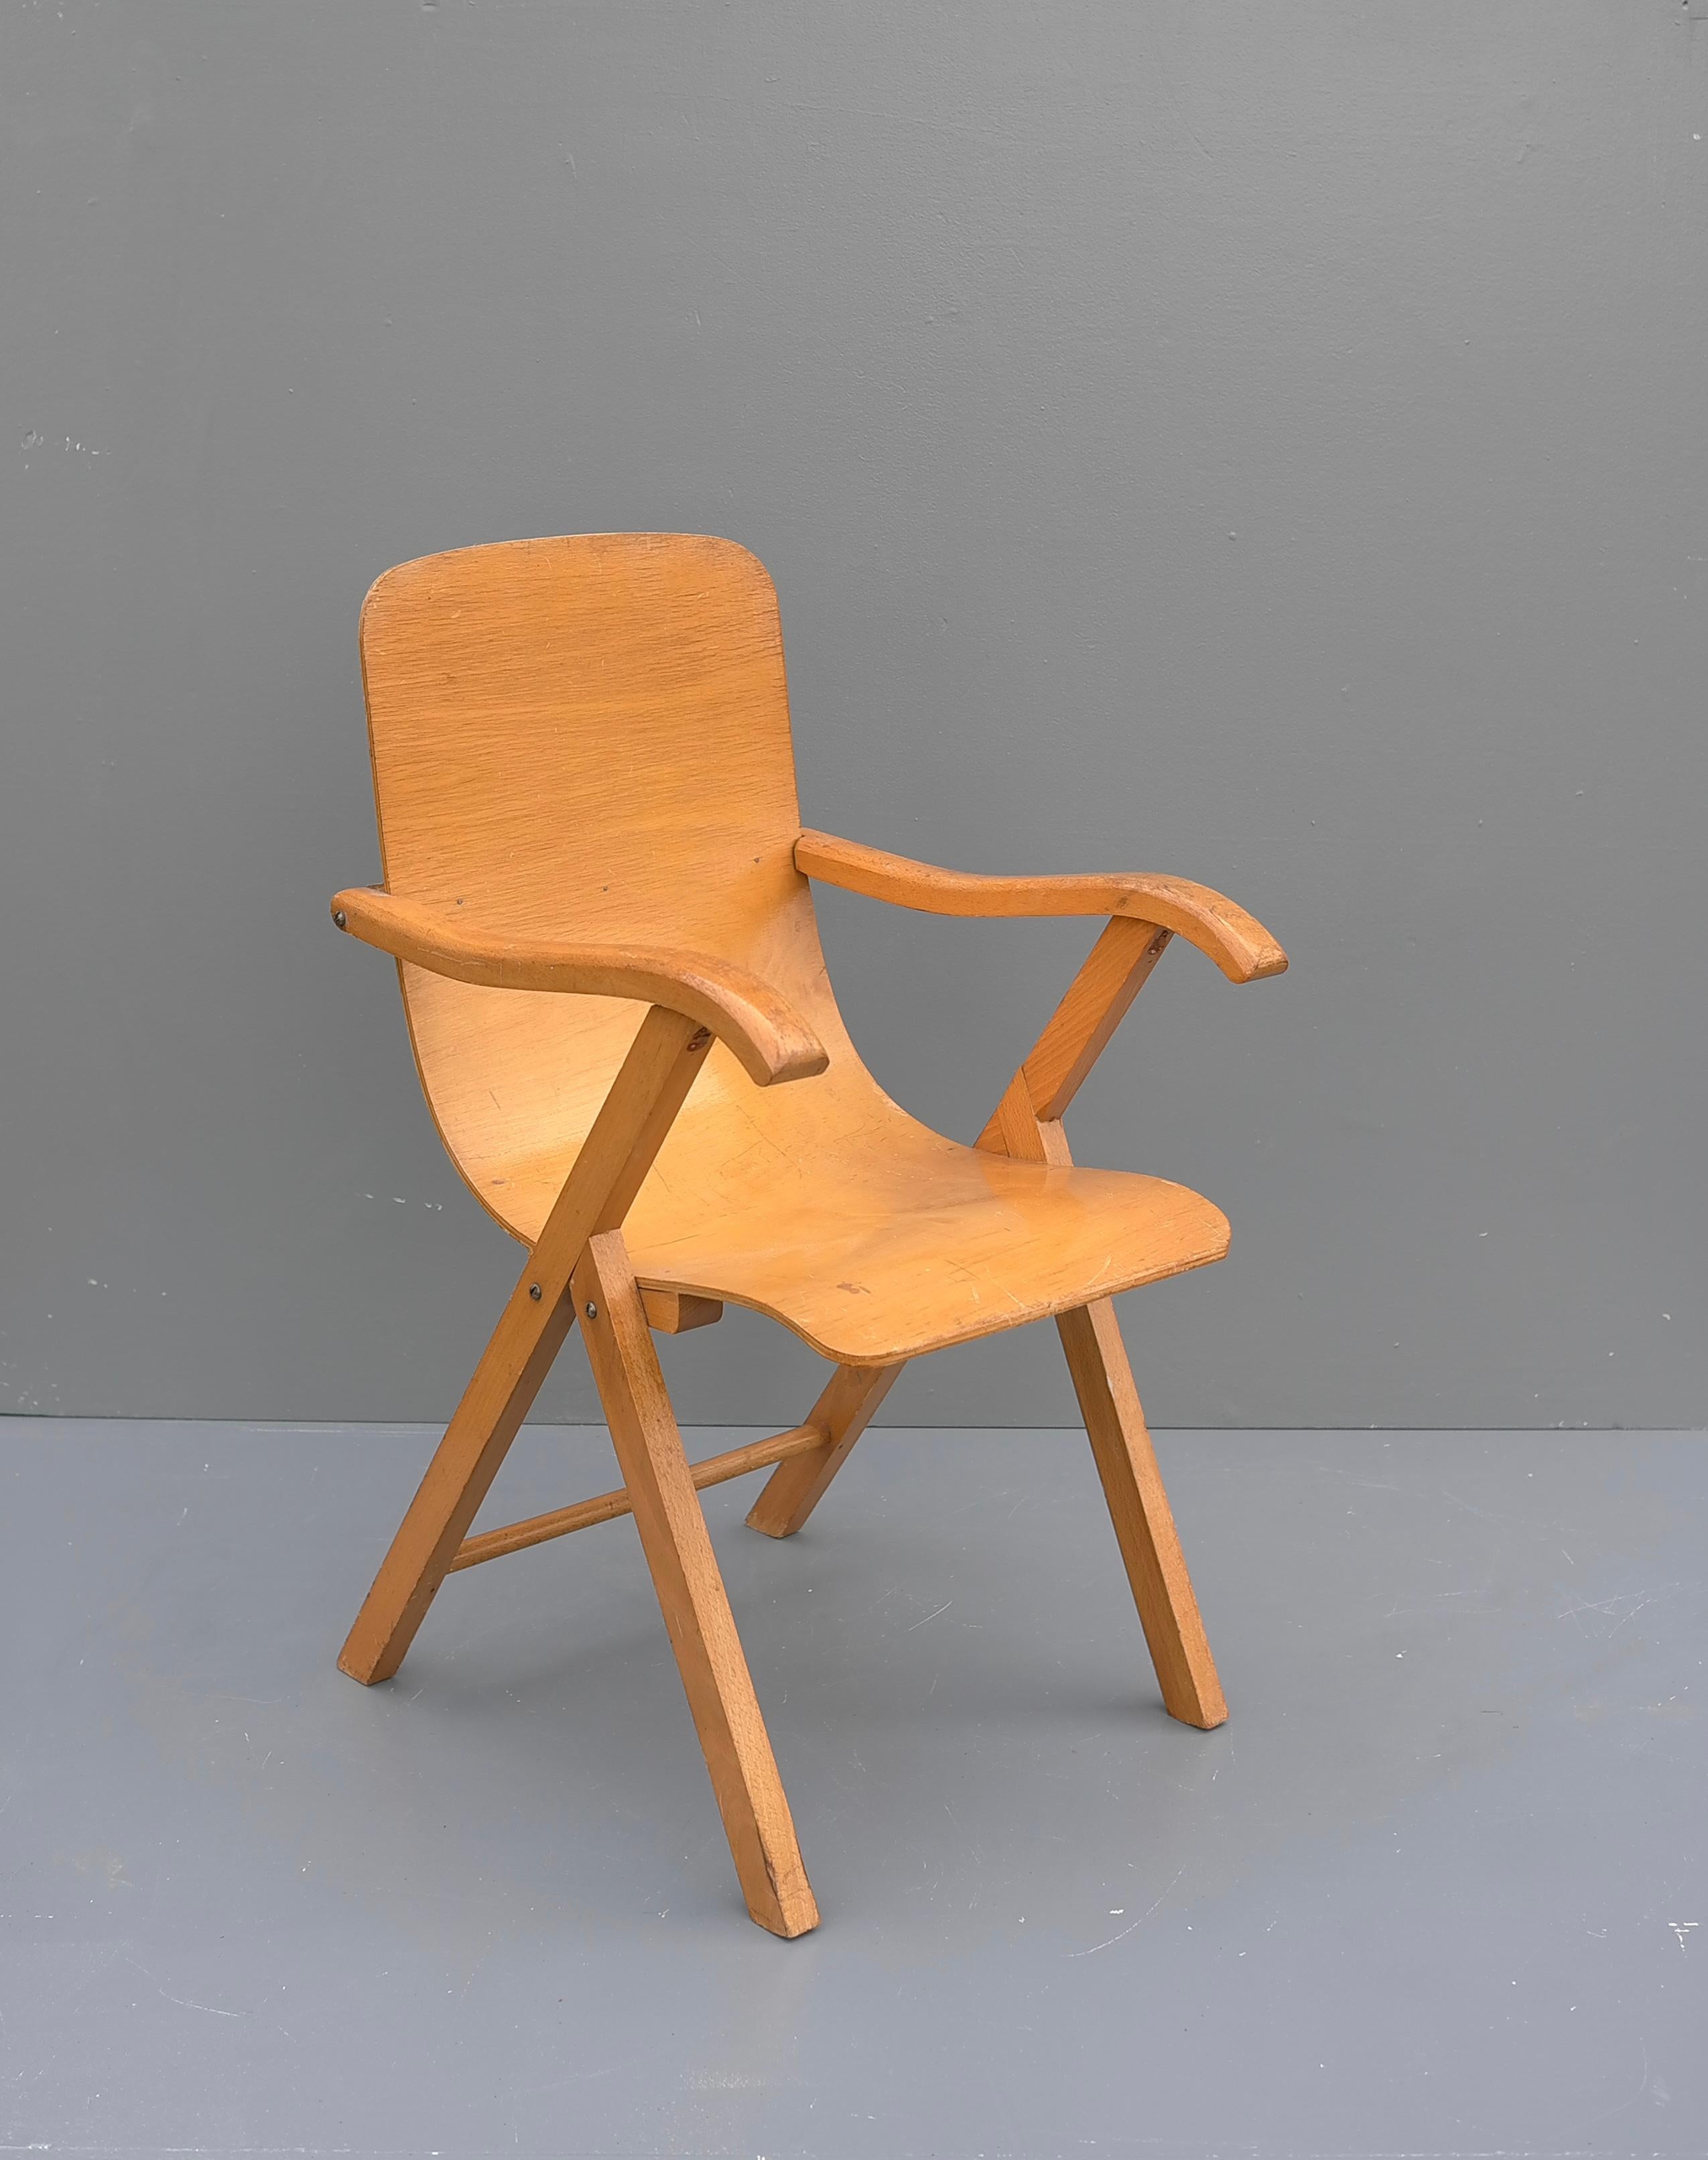 Mid-20th Century Plywood Mid-Century Modern Children Chair, 1950's For Sale